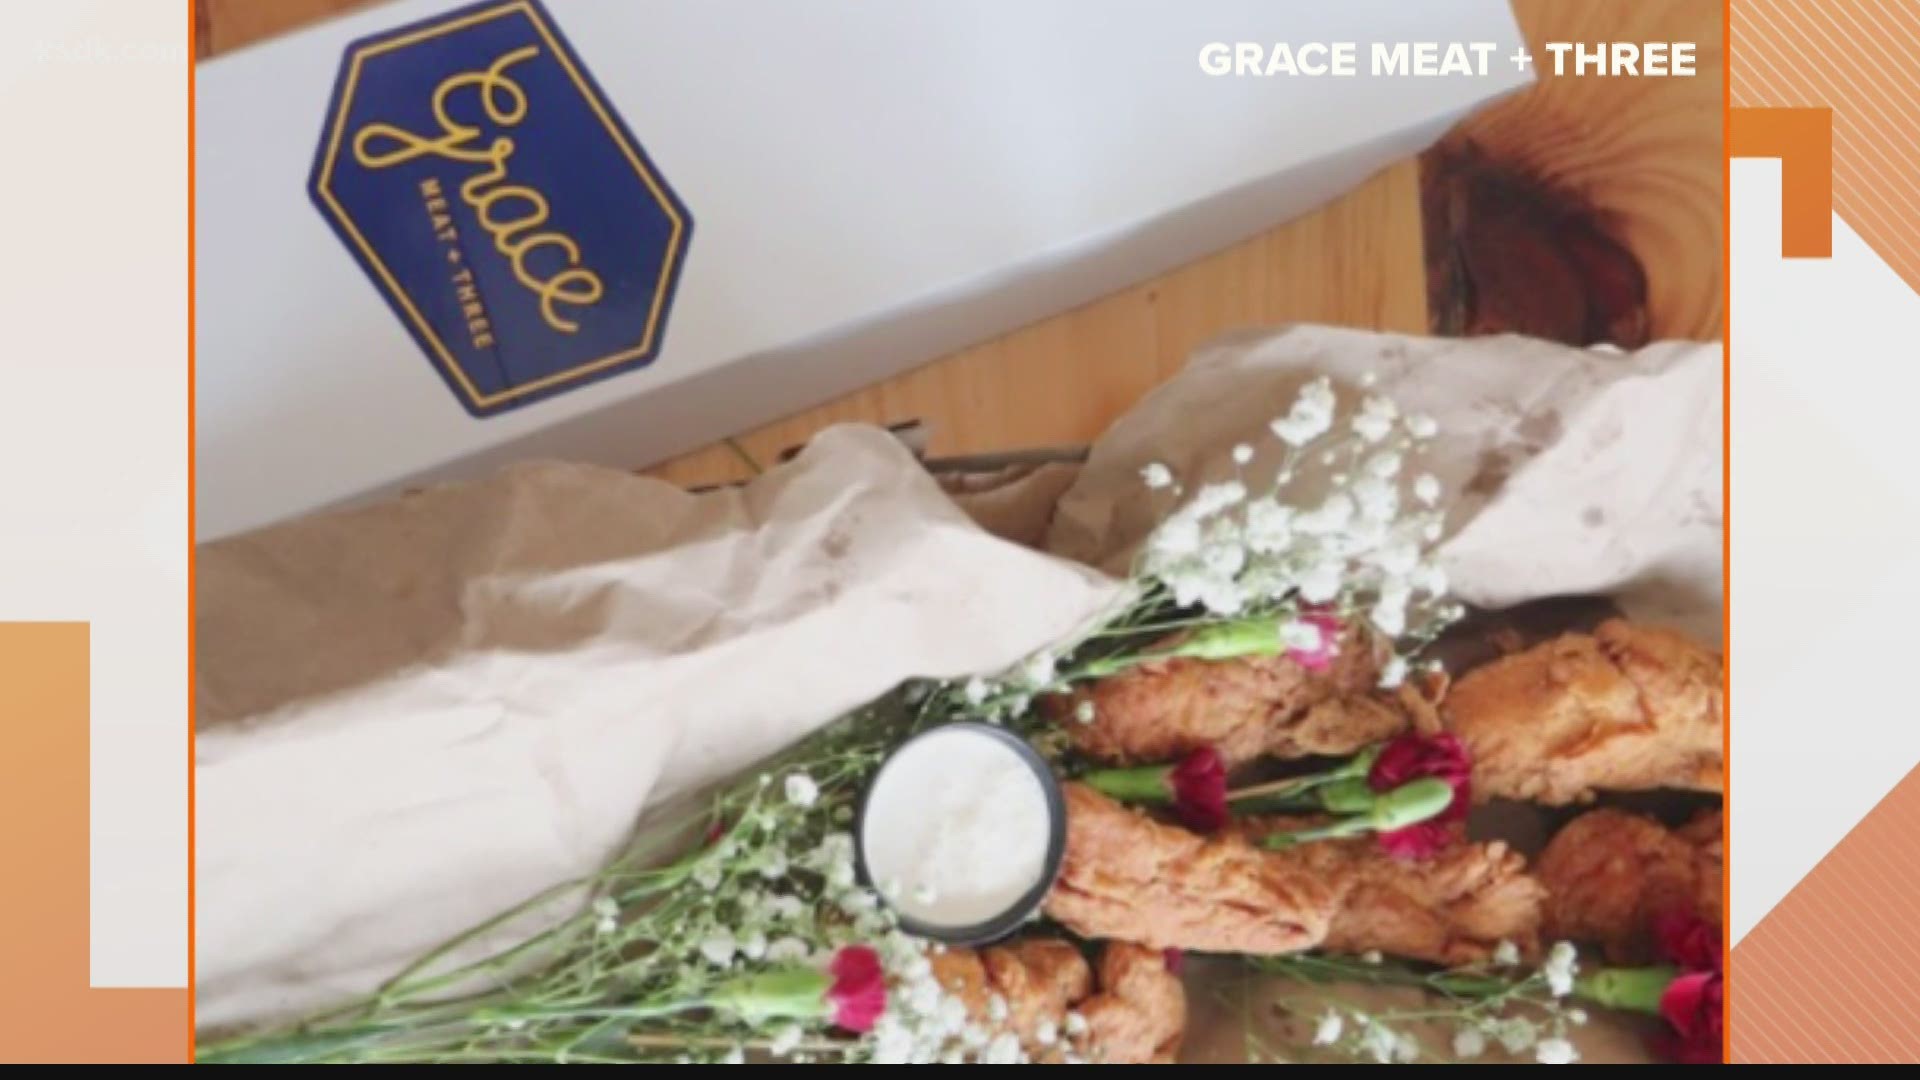 If you’re considering romantic yet delicious, Grace Meat + Three is offering just the treat.